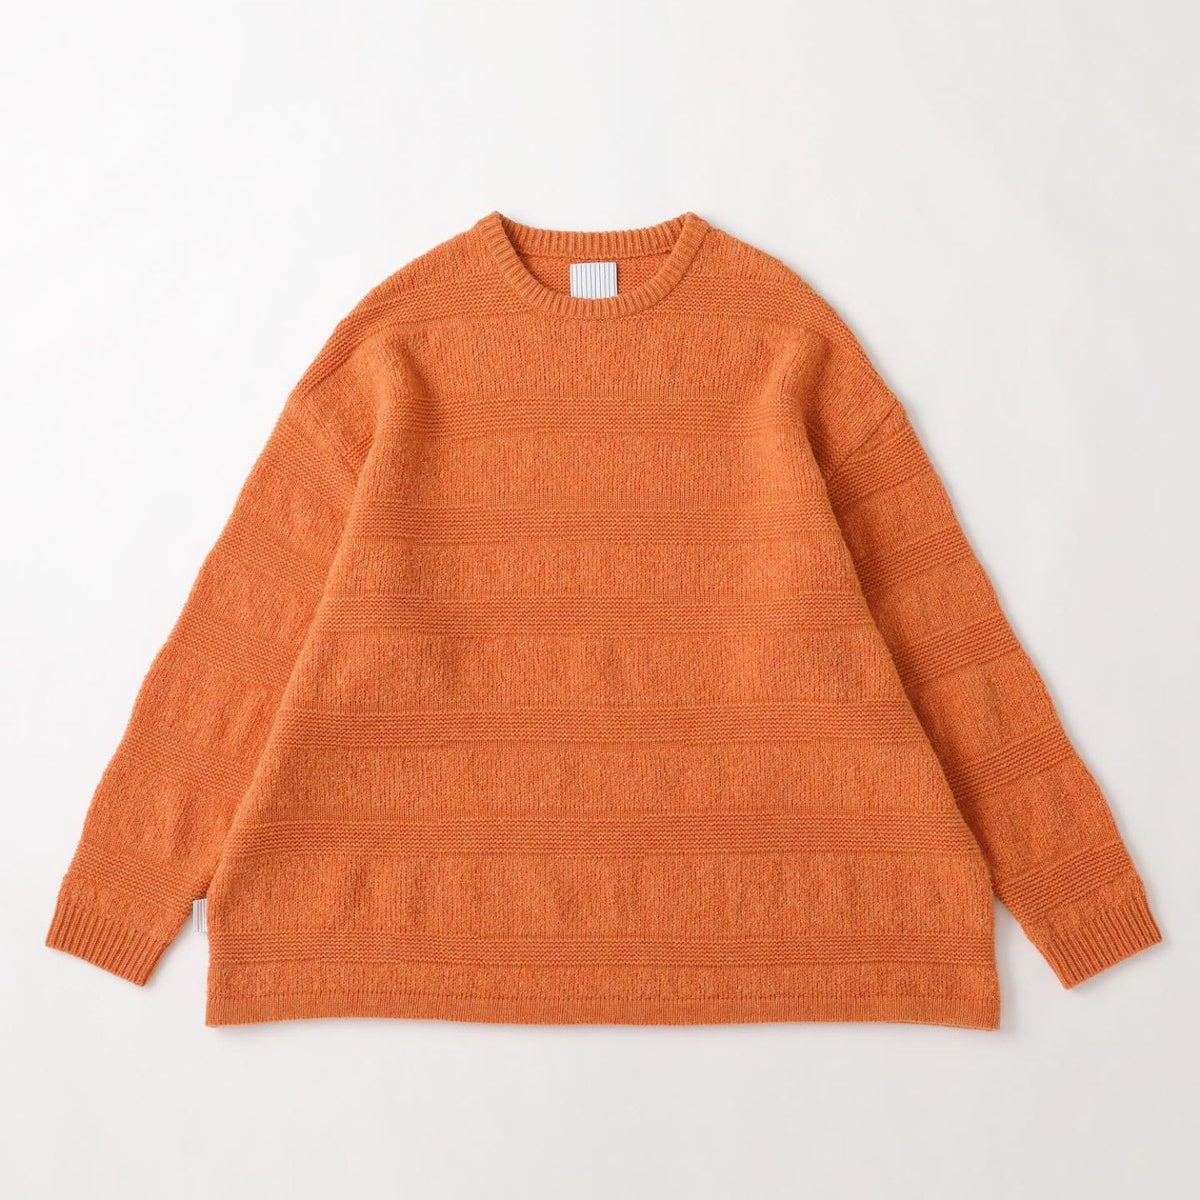 SFC Side Stripes Knit - S.F.C (Stripes For Creative) (エスエフシー